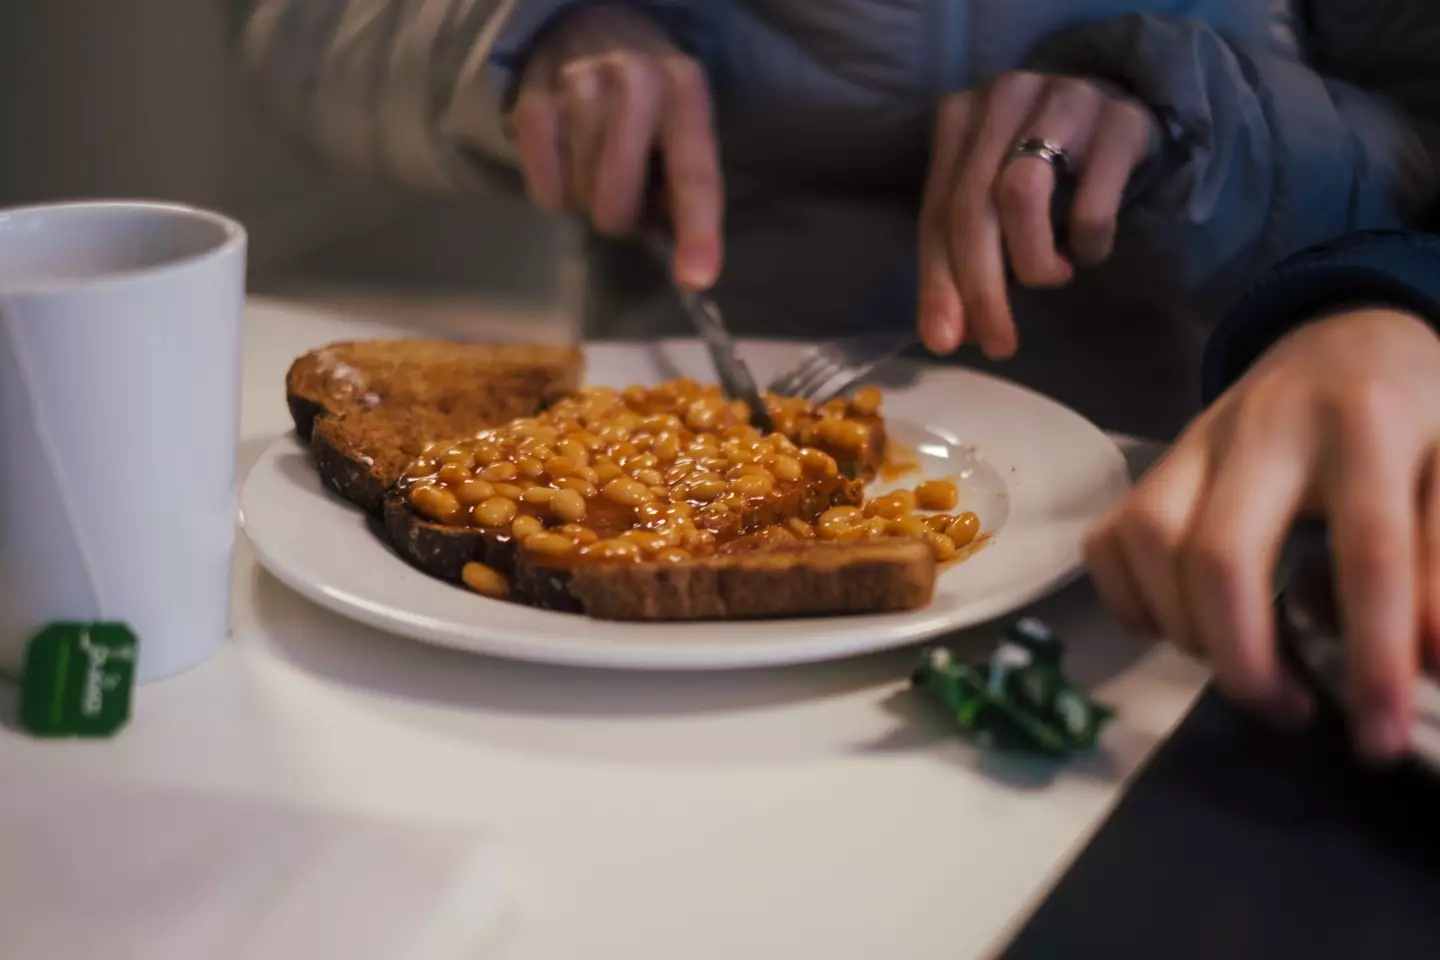 The mum said formerly cheap eats, like beans on toast, aren't cheap anymore.